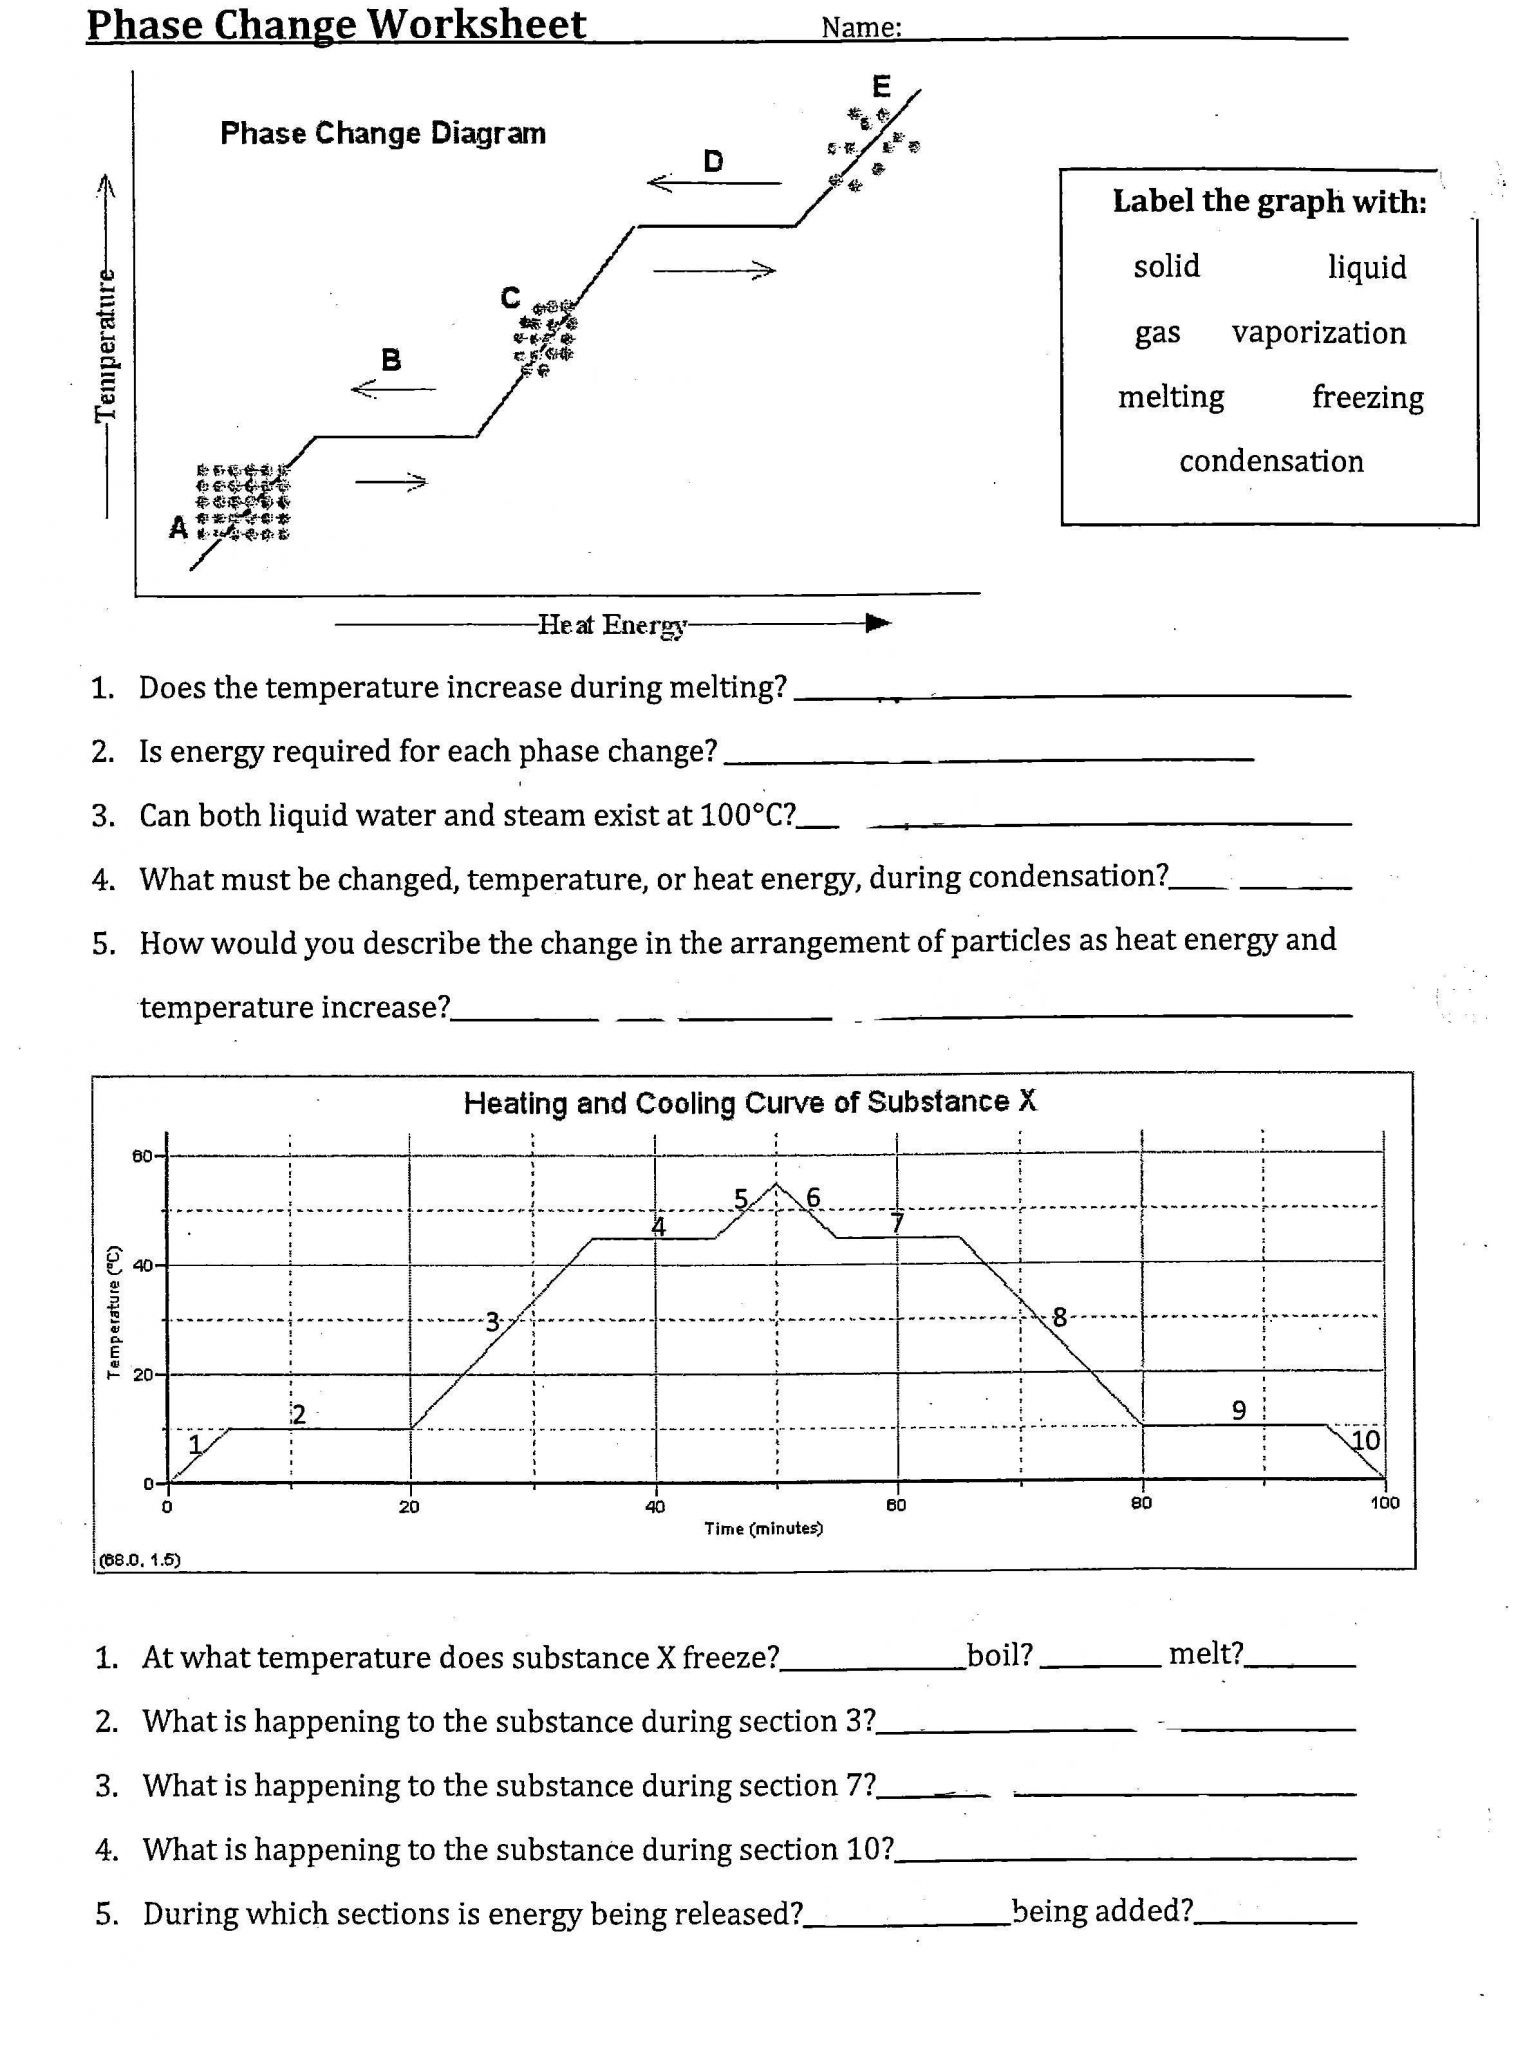 Semicolon and Colon Worksheet with Answers with Phase Change Worksheet Answer Key Beautiful Physical Vs Chemical